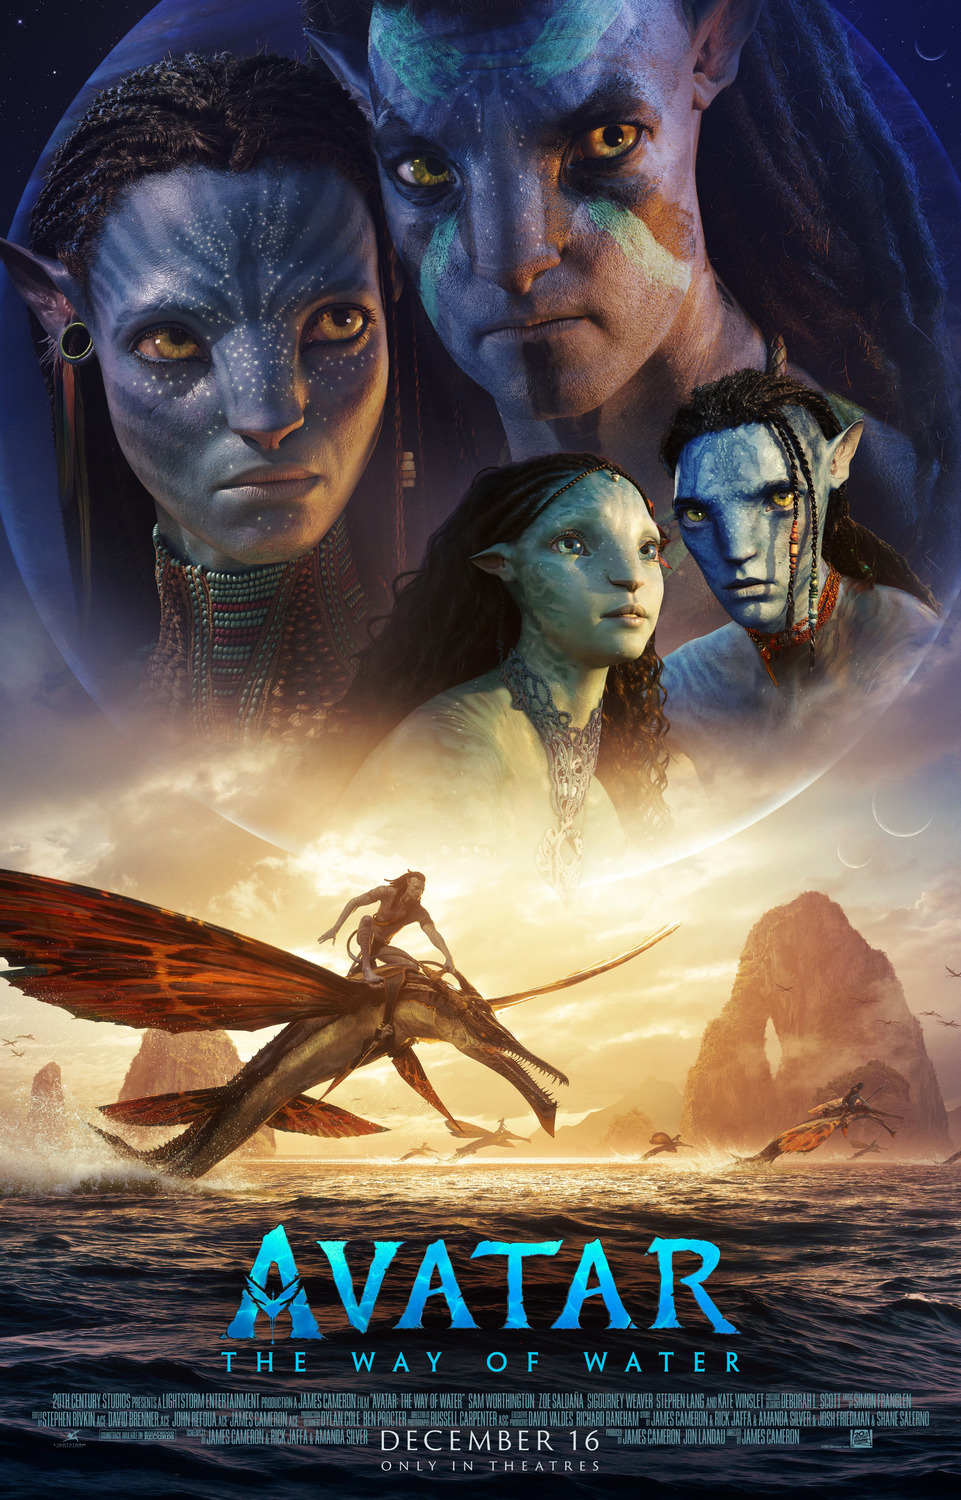 Jake, Neytiri and the faces of other na'vi characters float about a watery horizon with an aquatic dragon flying over the sea.